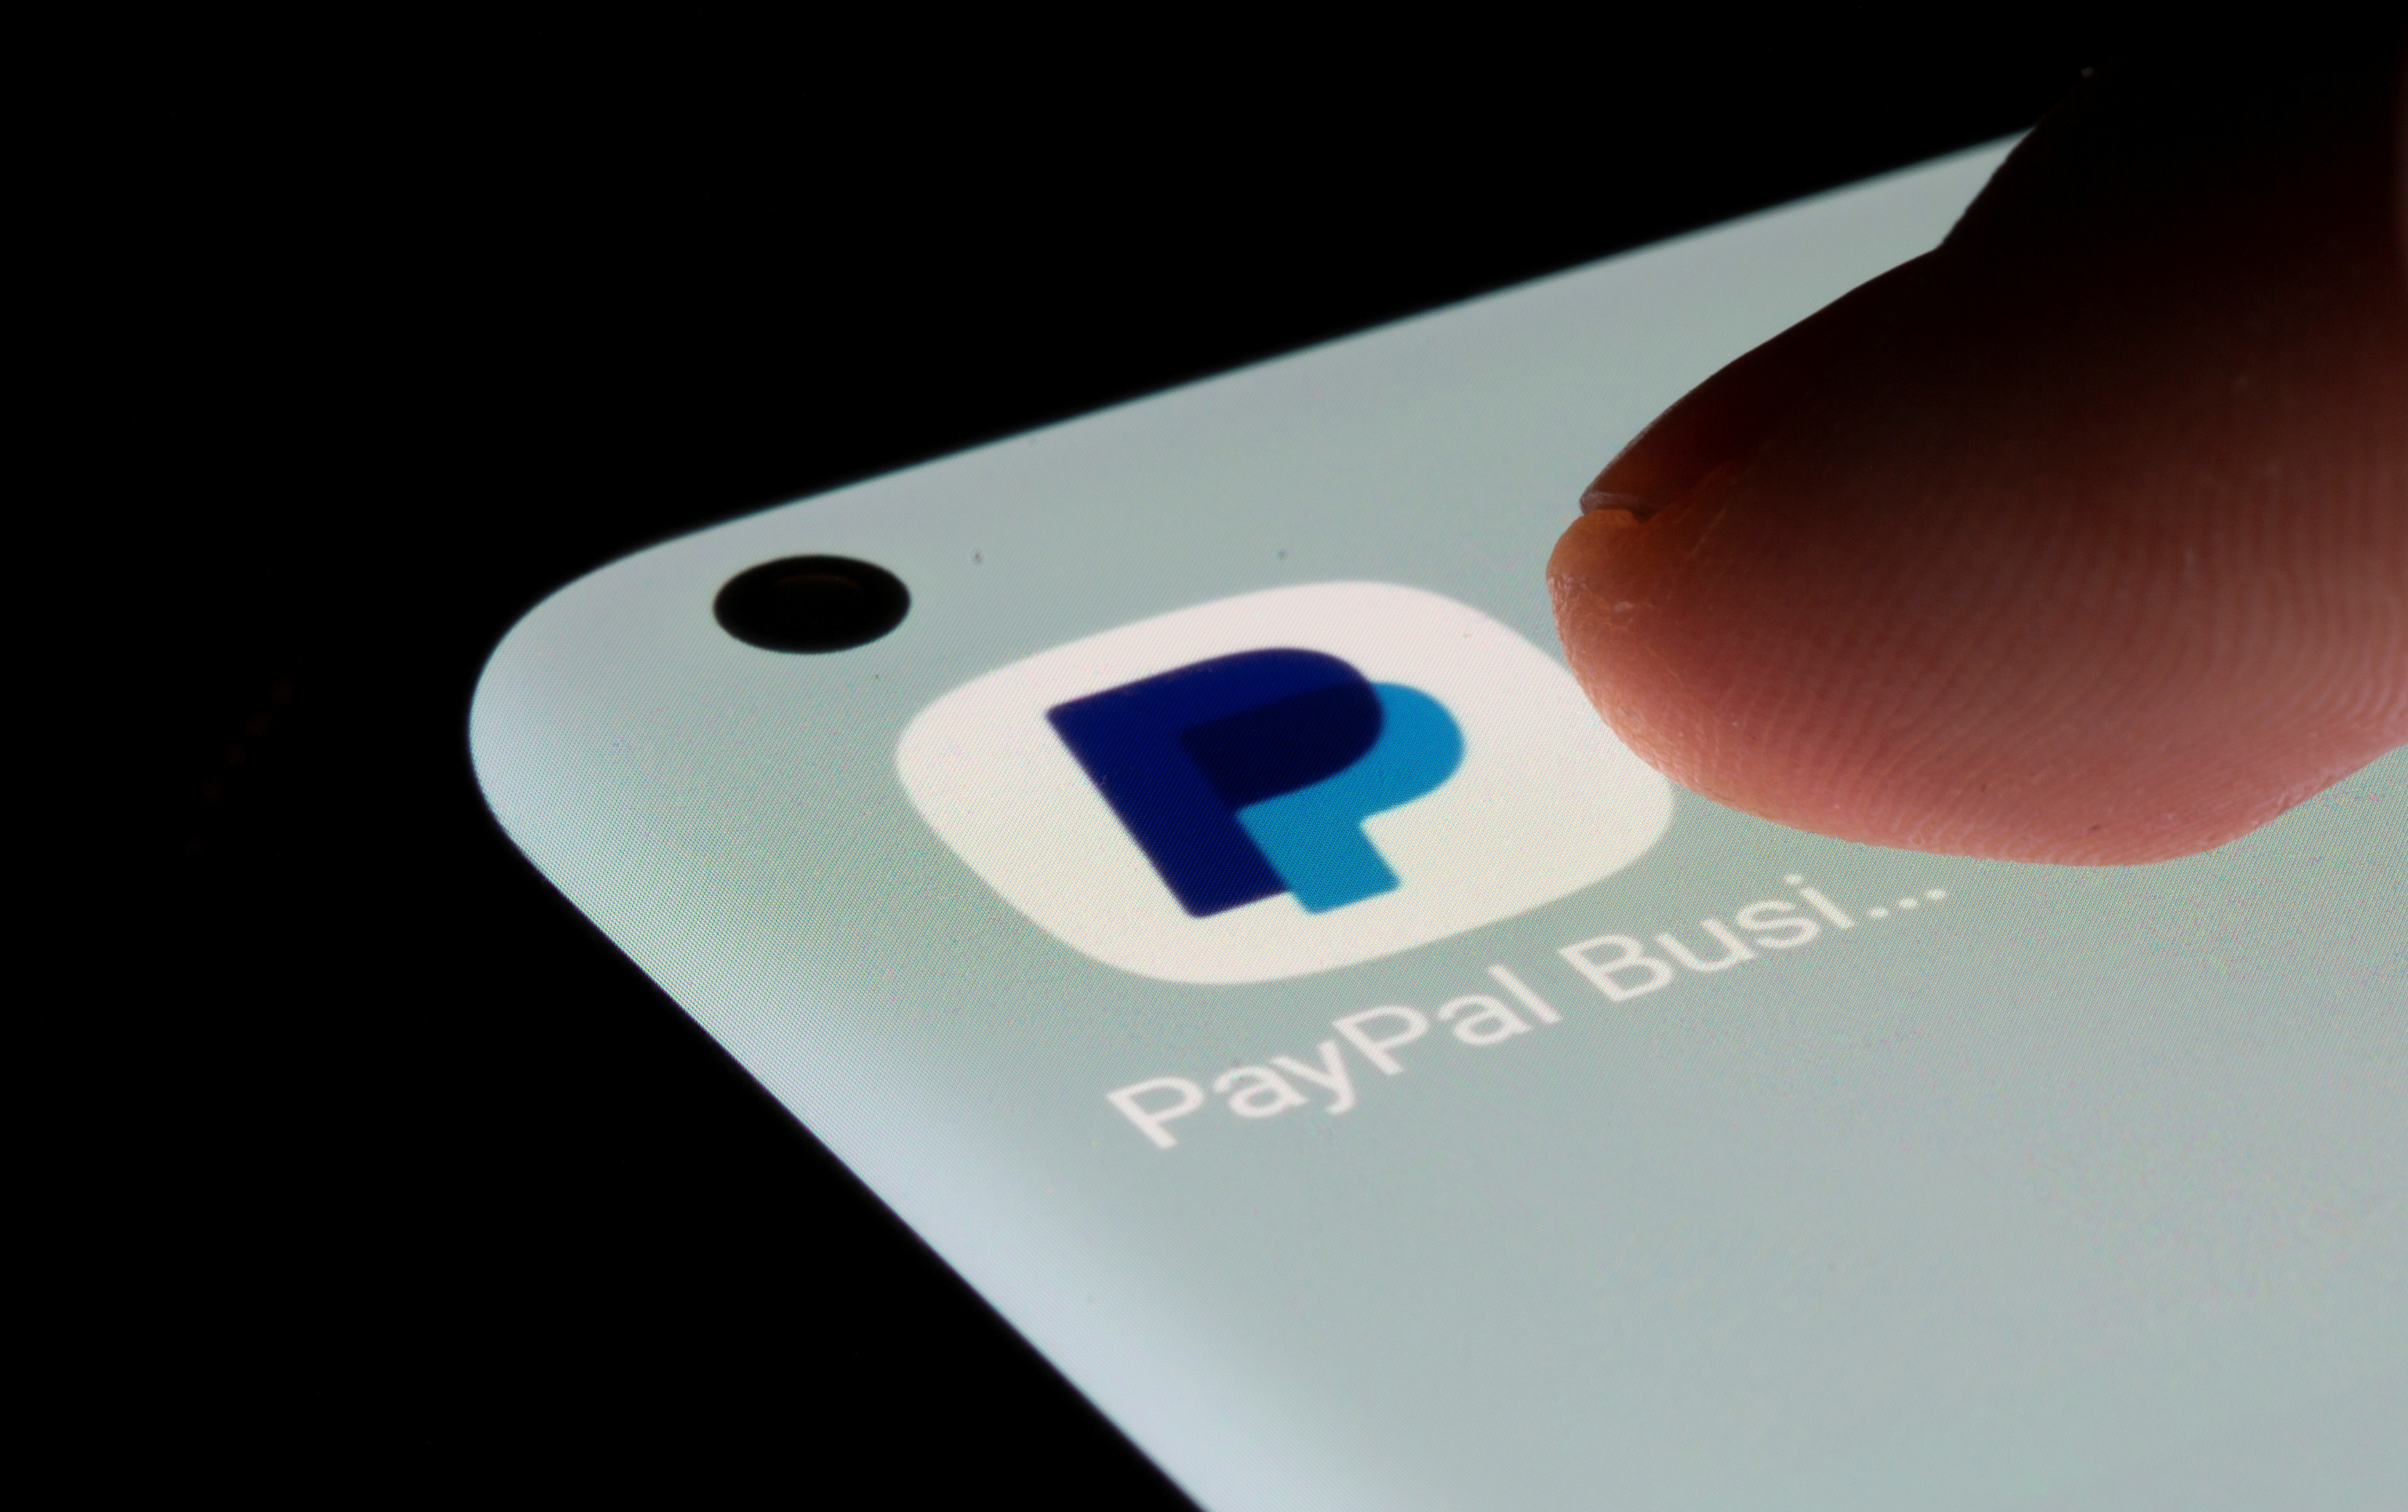 PayPal app is seen on a smartphone in this illustration taken